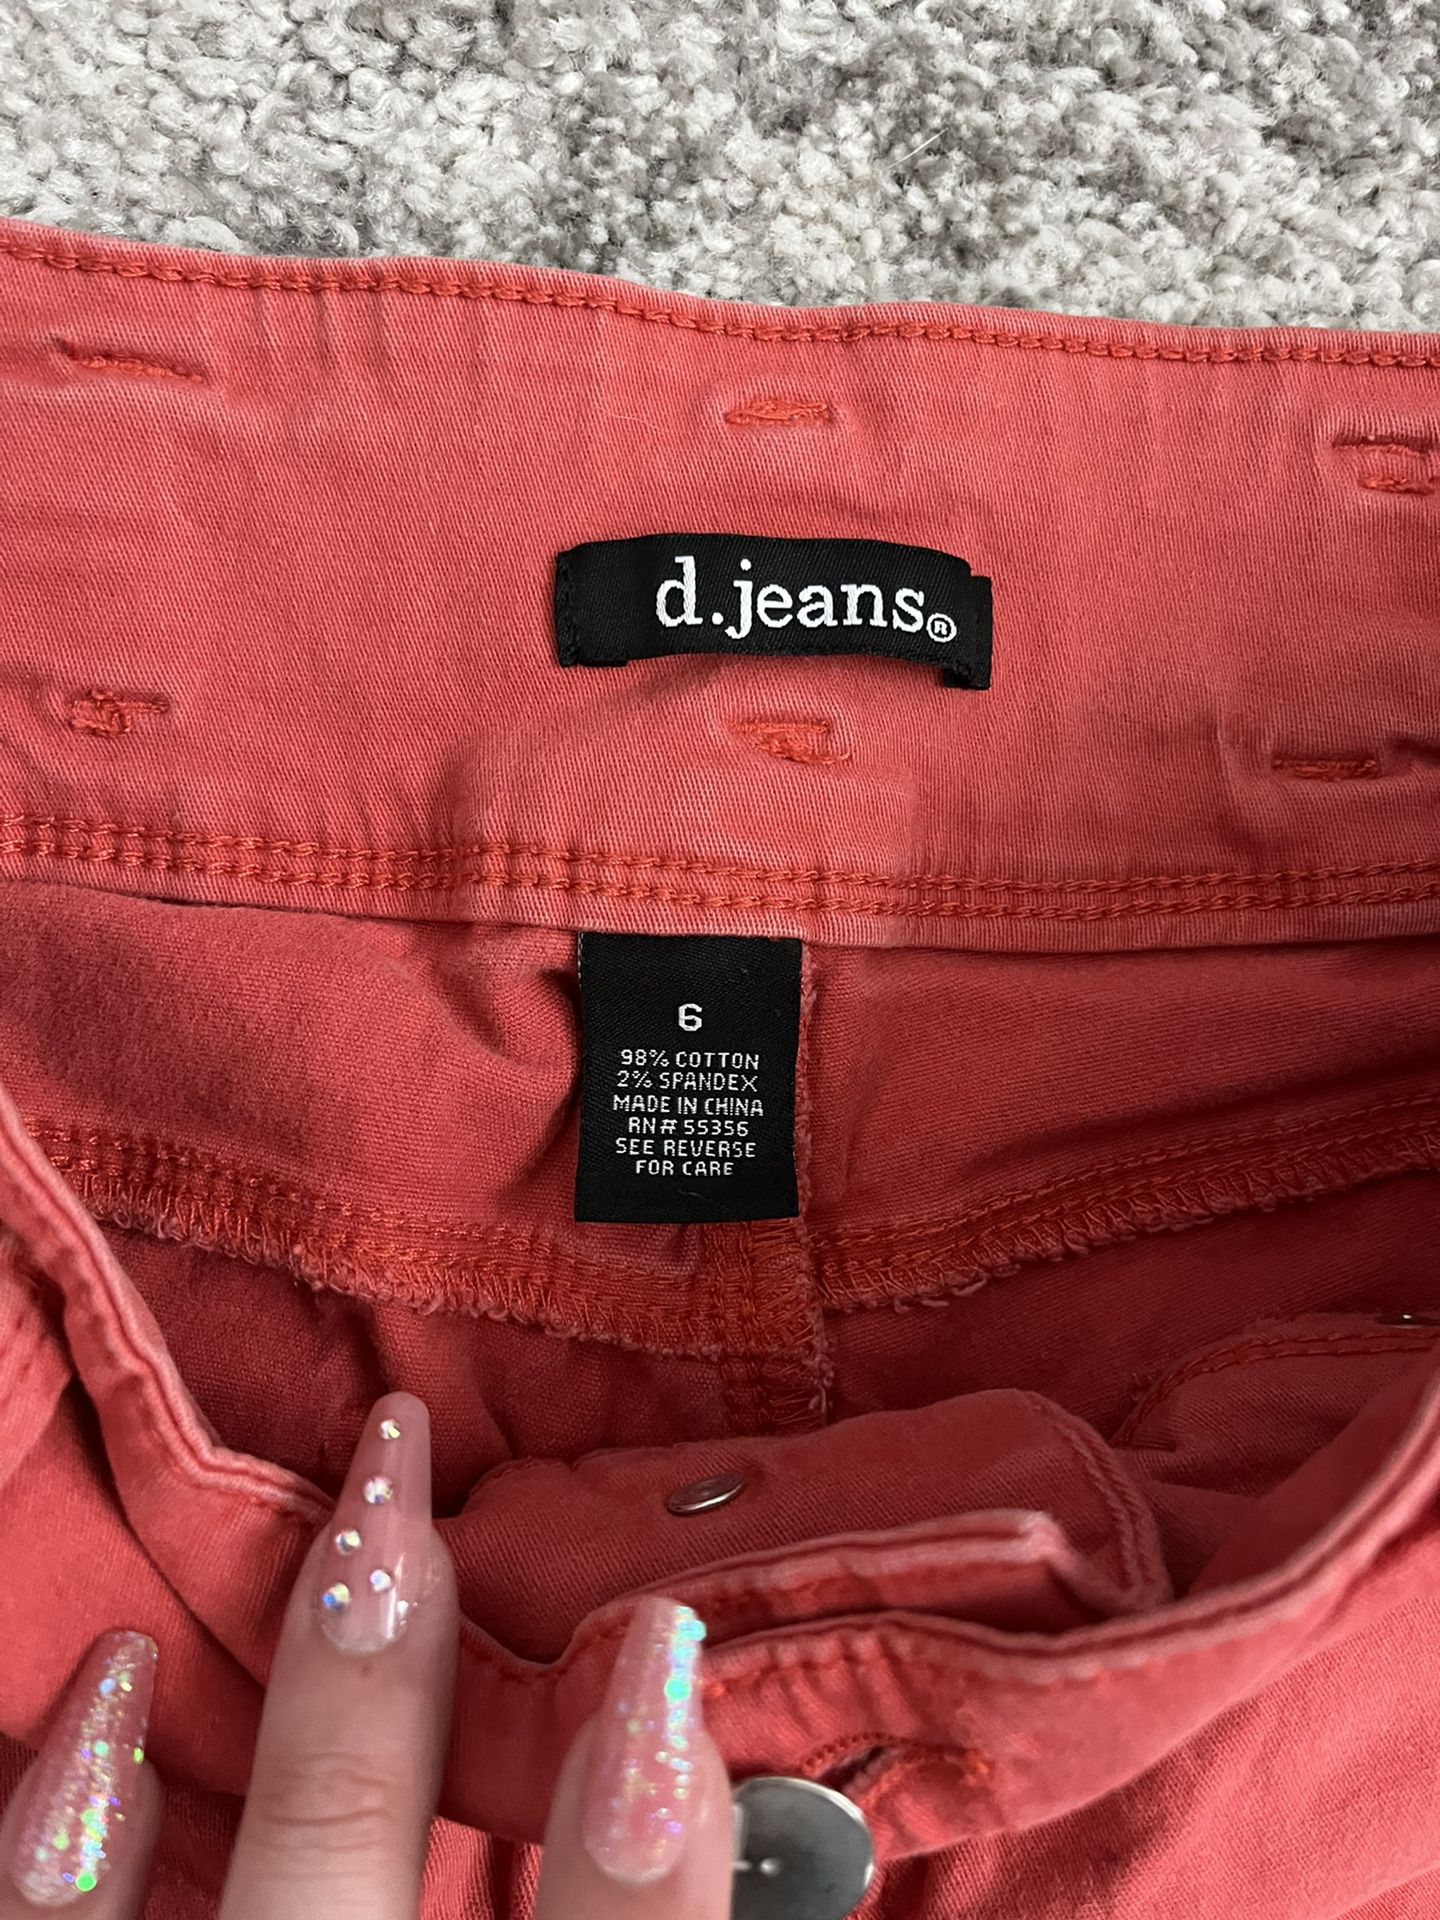 D Jeans Coral High waisted Jean Shorts